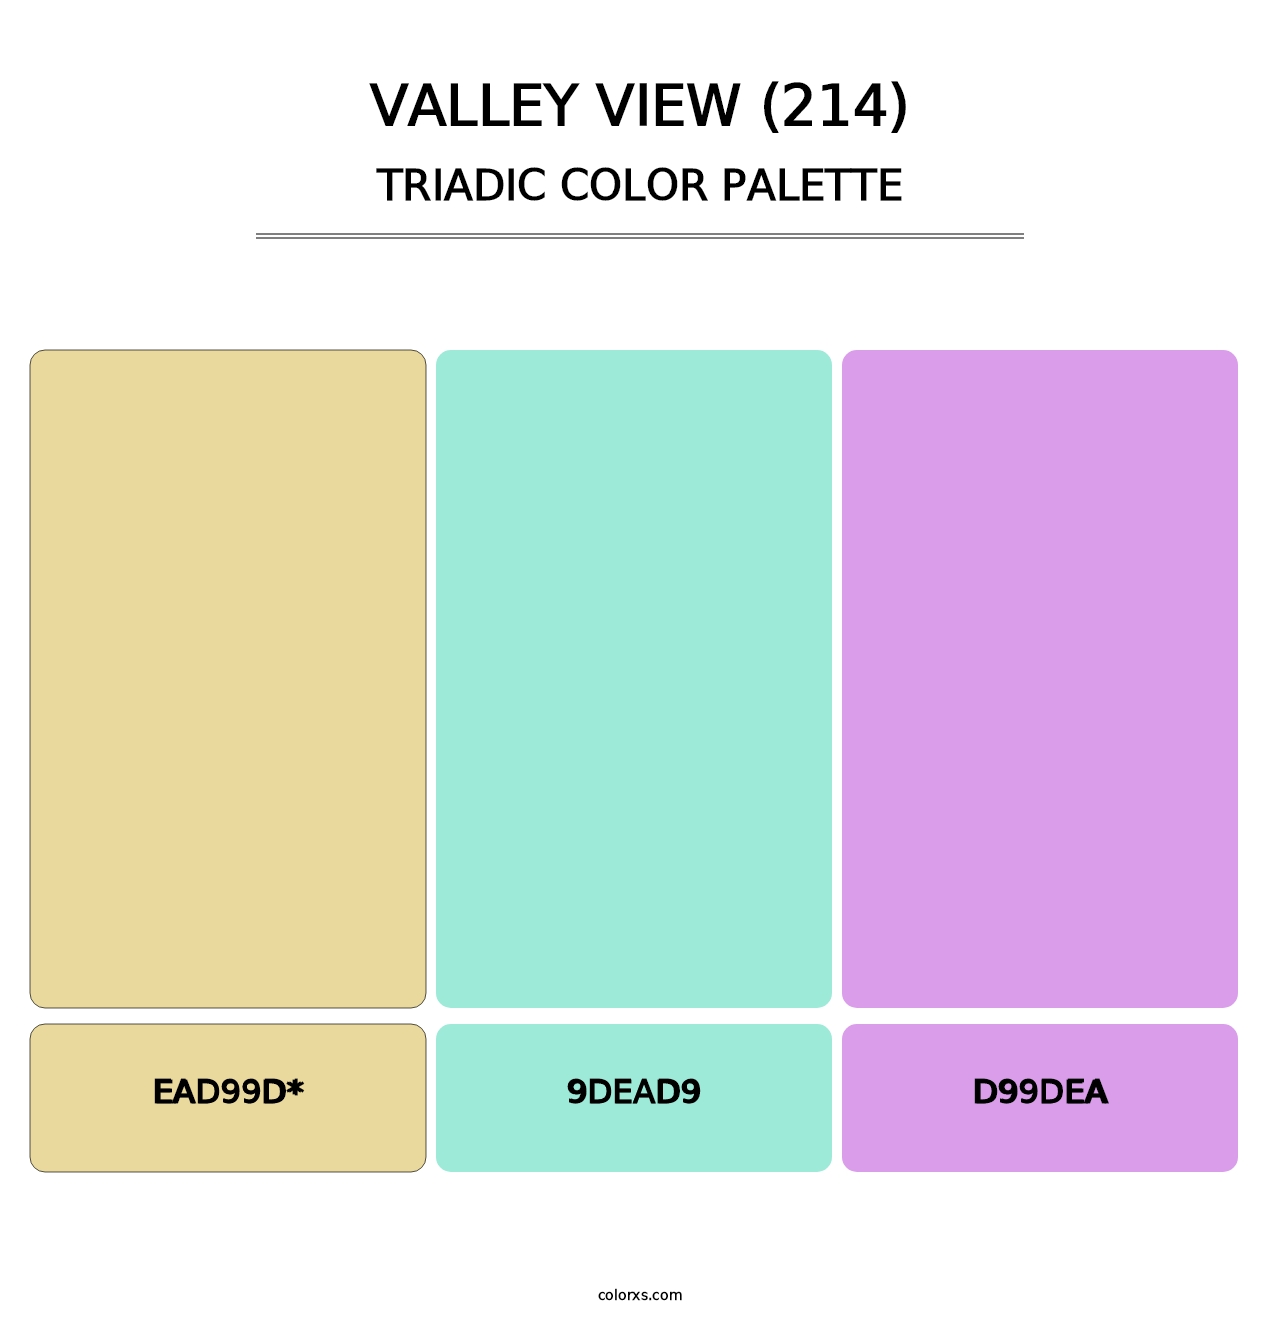 Valley View (214) - Triadic Color Palette